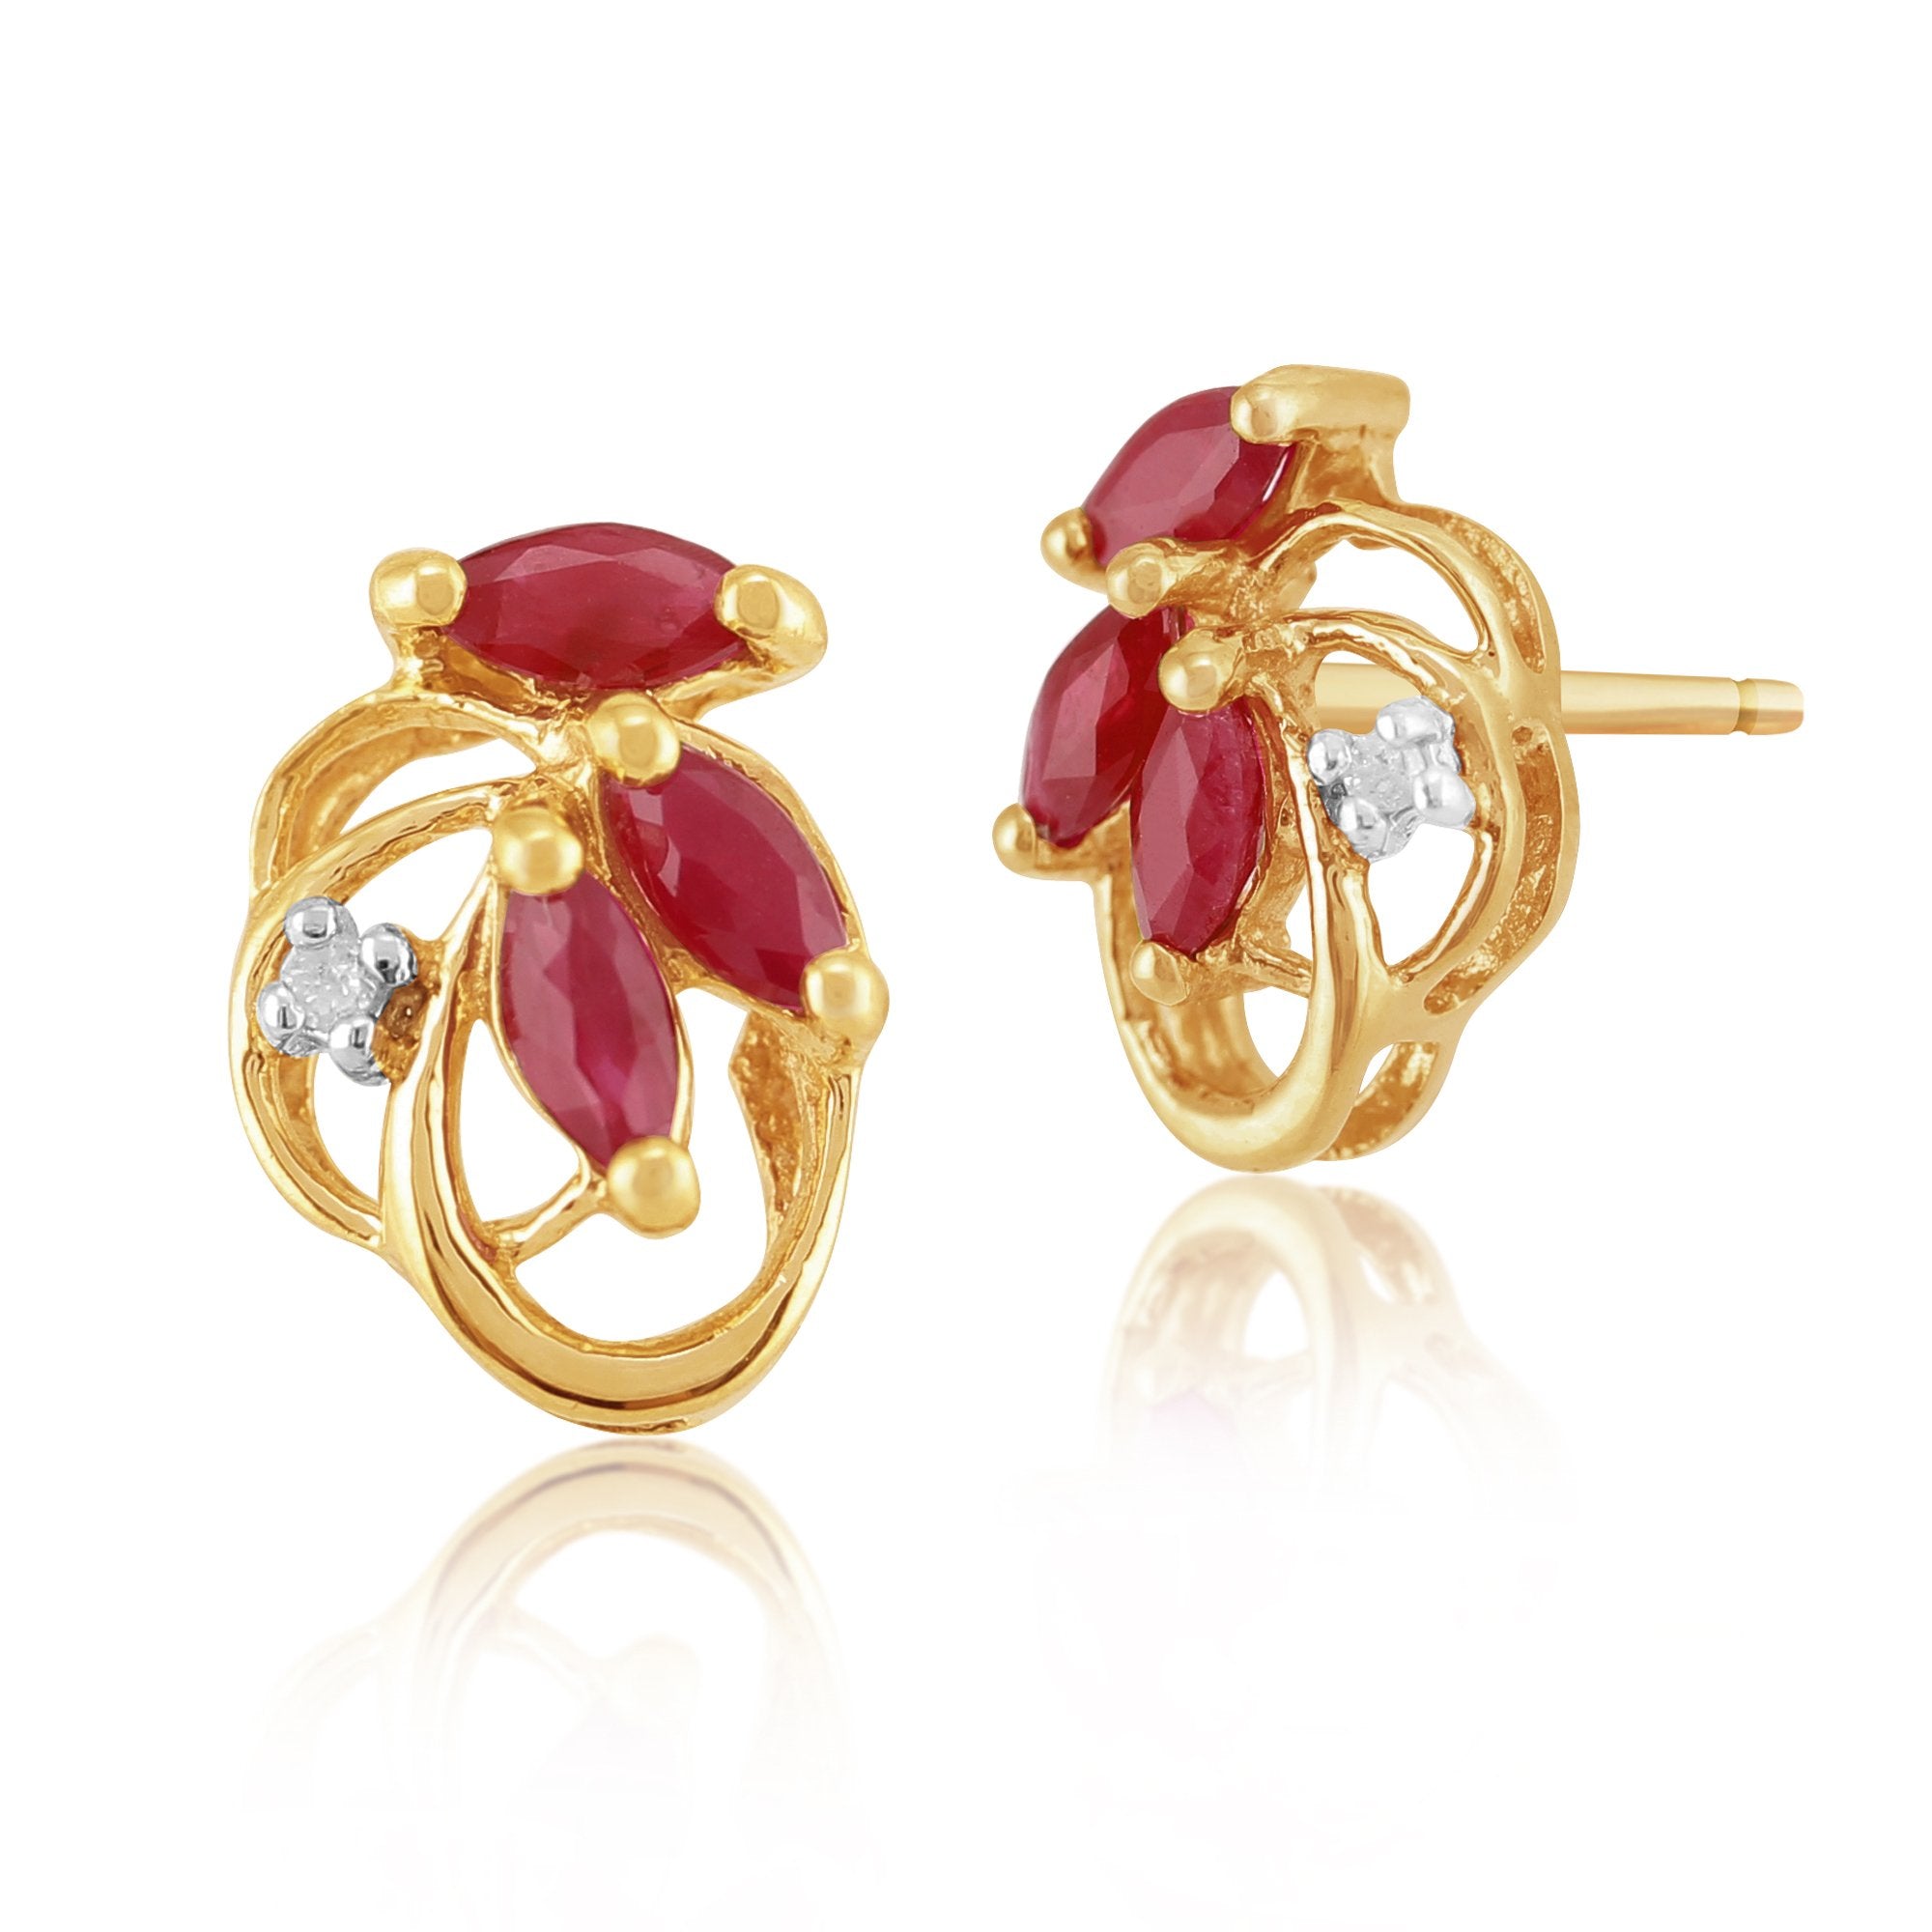 Floral Marquise Ruby & Diamond Stud Earrings in 9ct Yellow Gold